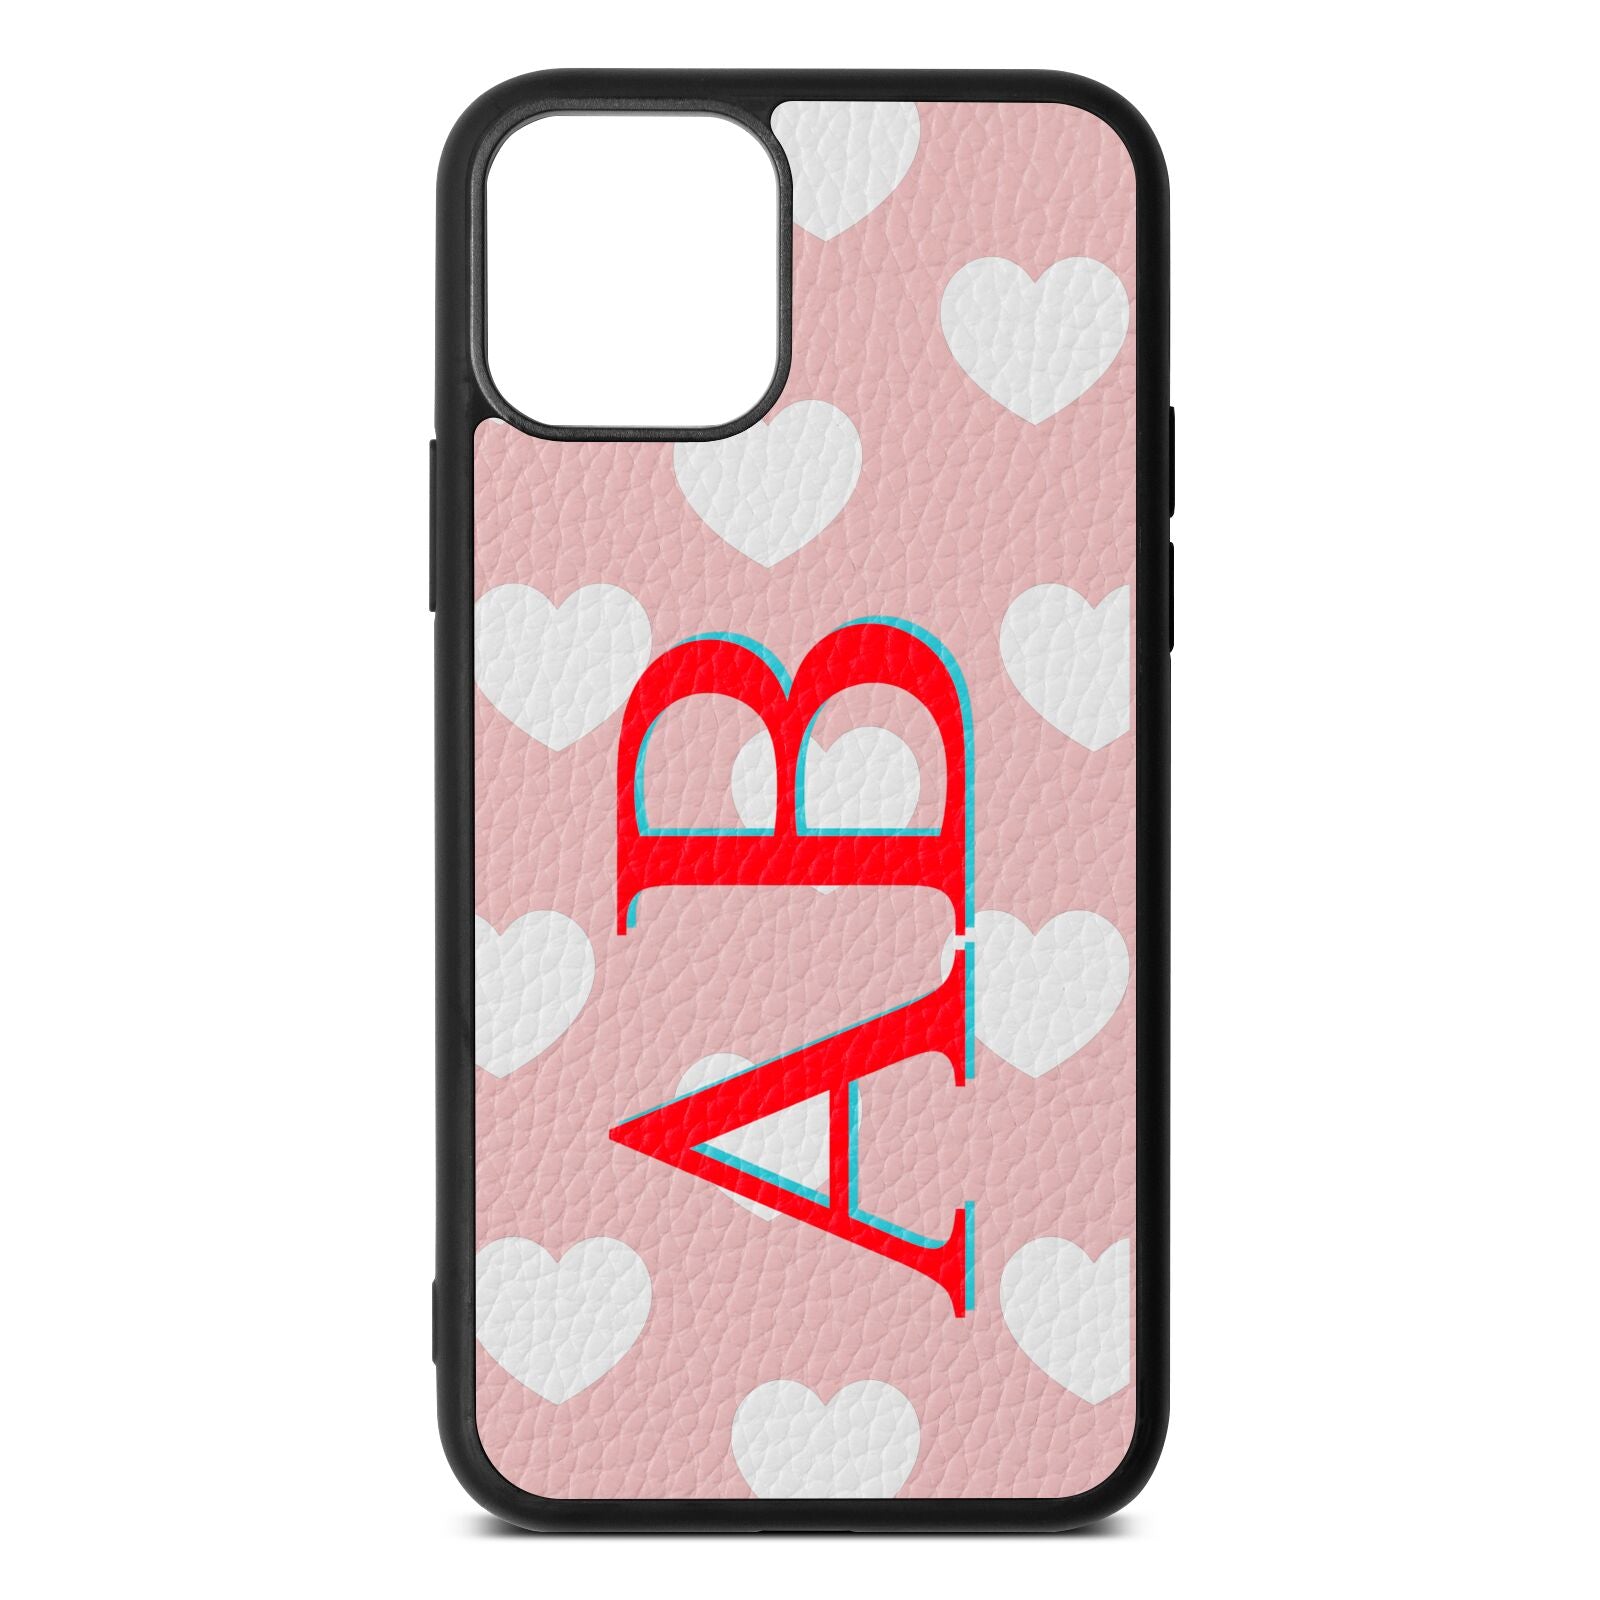 Heart Print Initials Pink Pebble Leather iPhone 11 Case